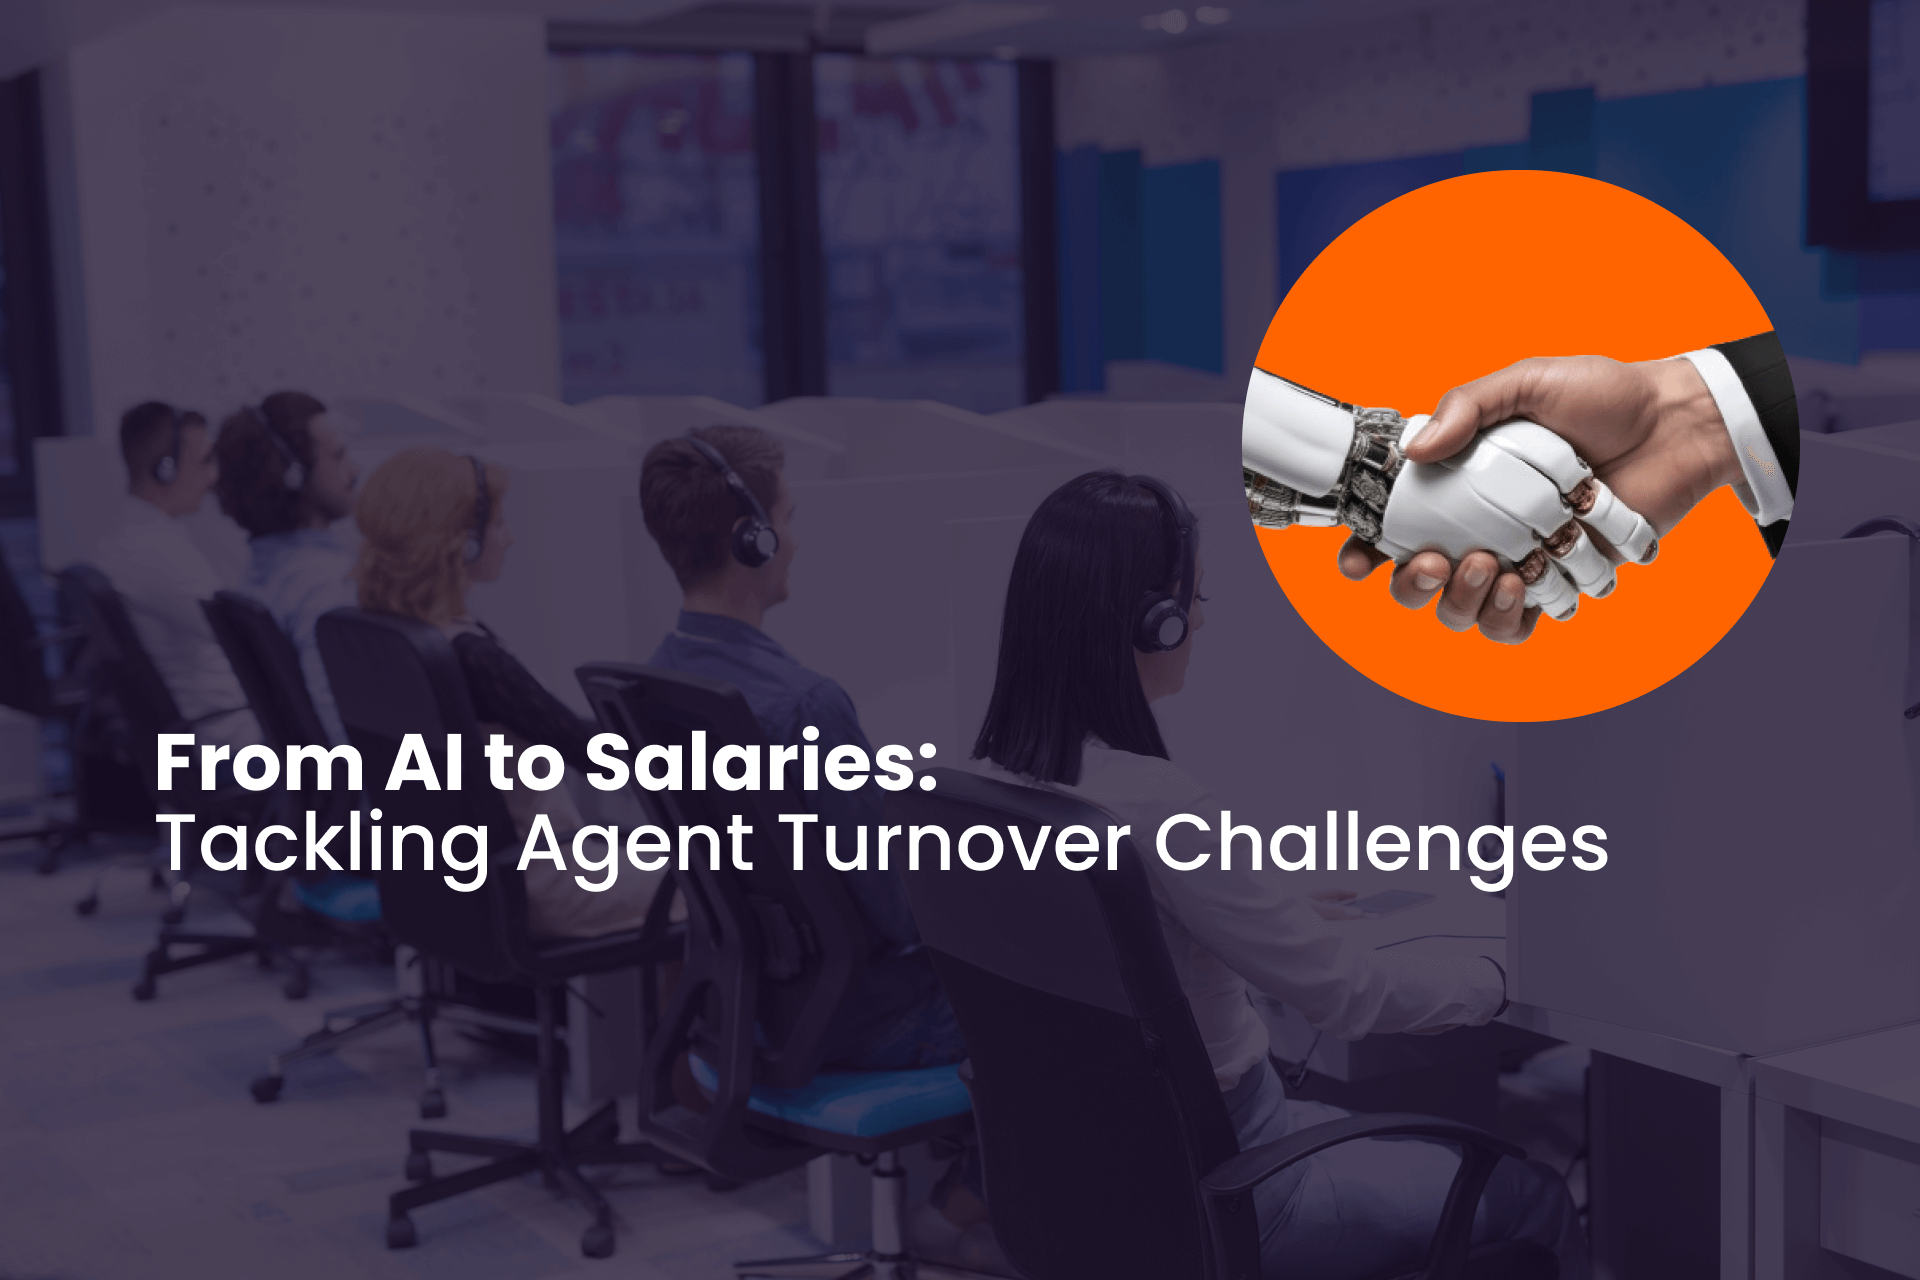 From AI to Salaries: Tackling Agent Turnover Challenges